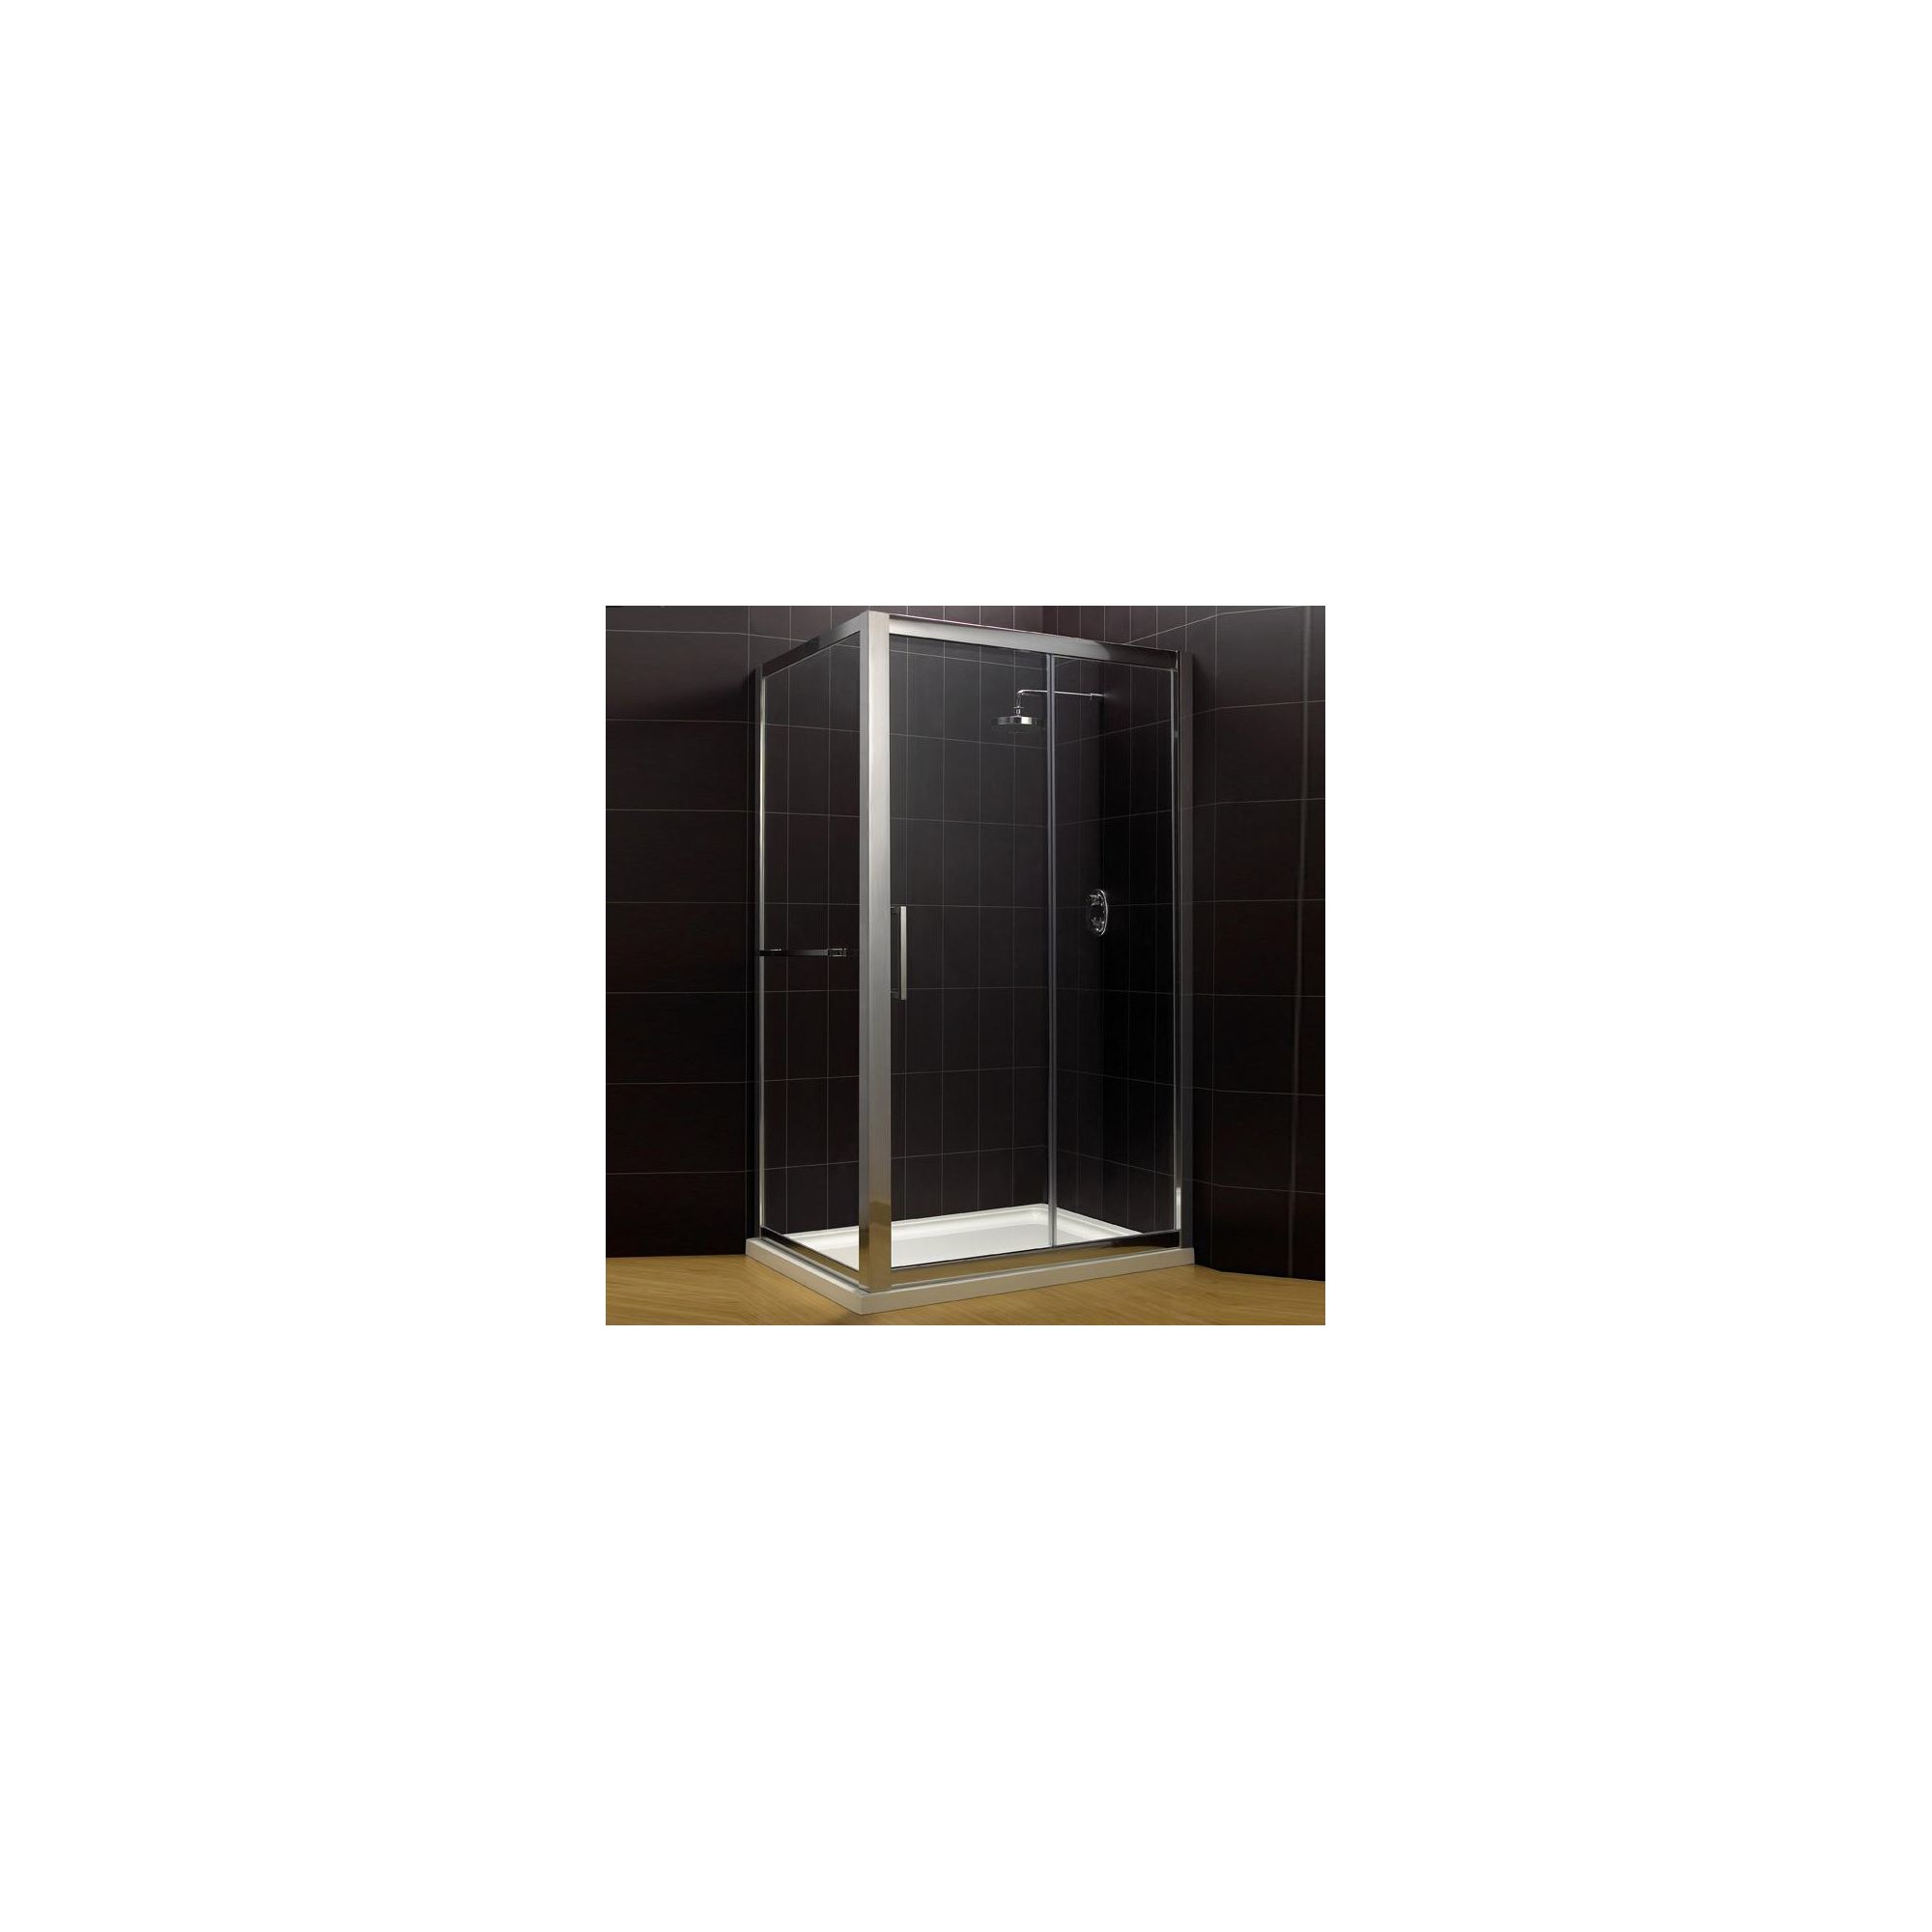 Duchy Supreme Silver Sliding Door Shower Enclosure with Towel Rail, 1600mm x 900mm, Standard Tray, 8mm Glass at Tesco Direct